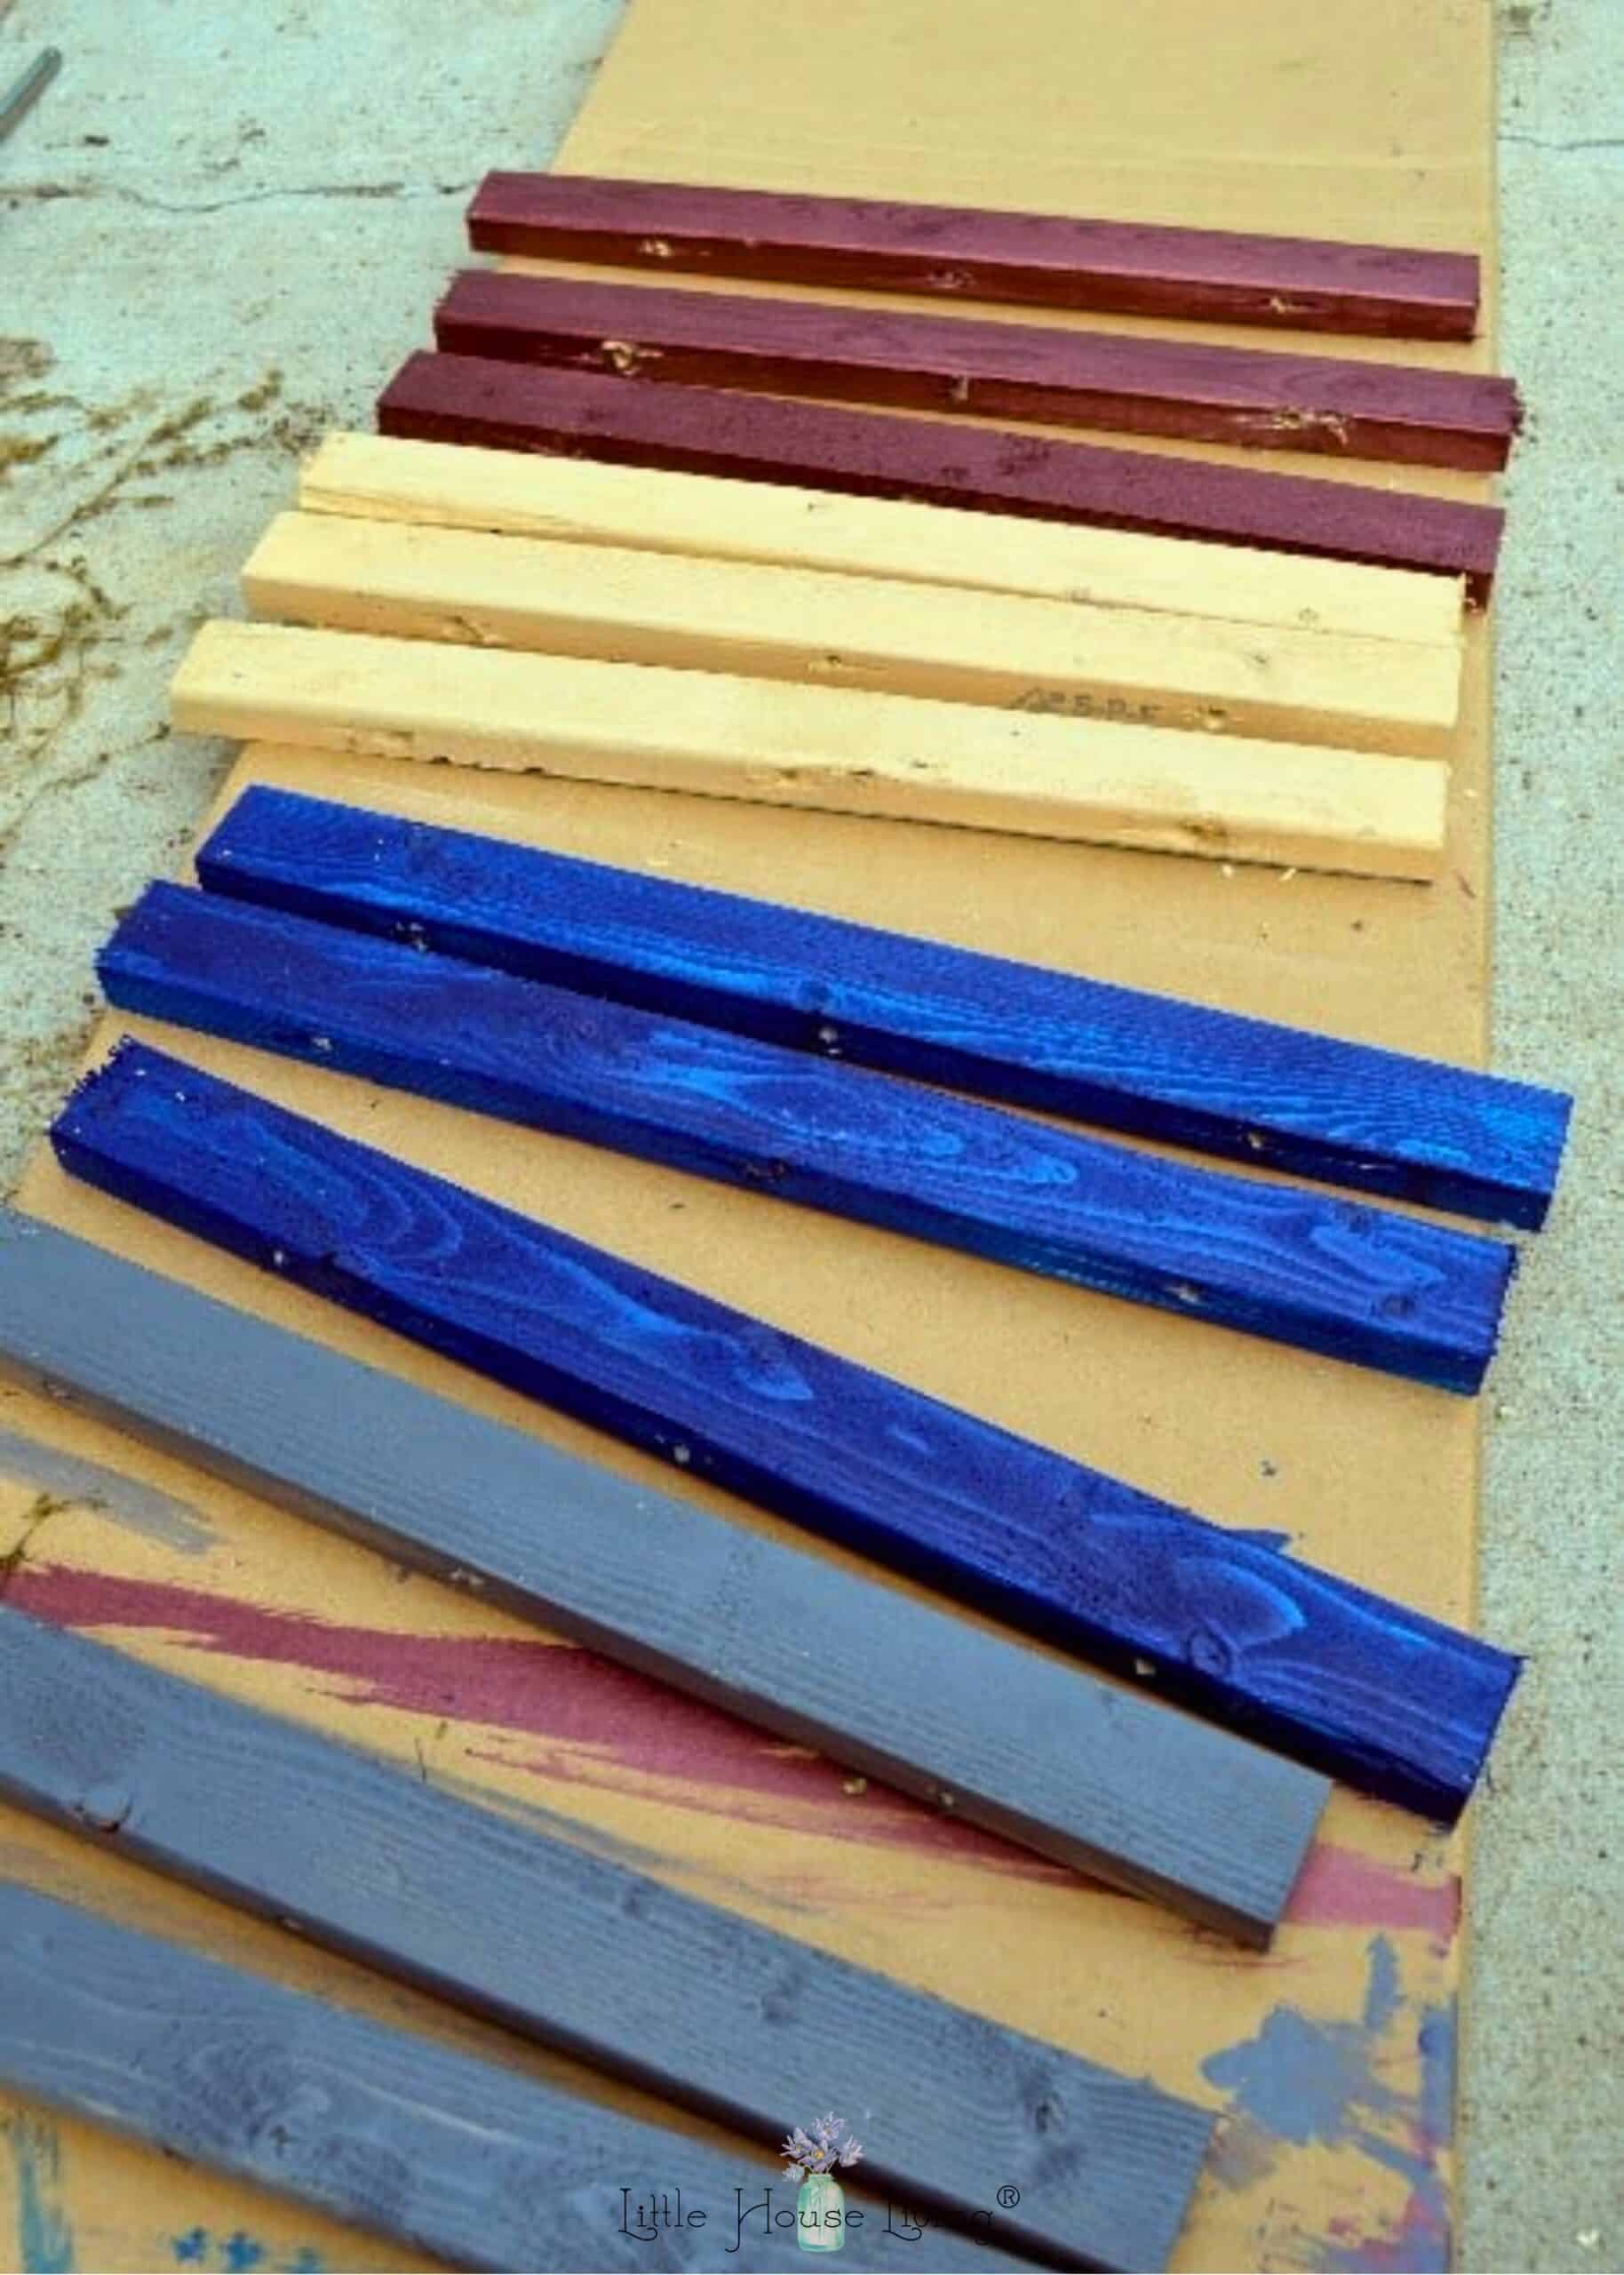 Colored wood